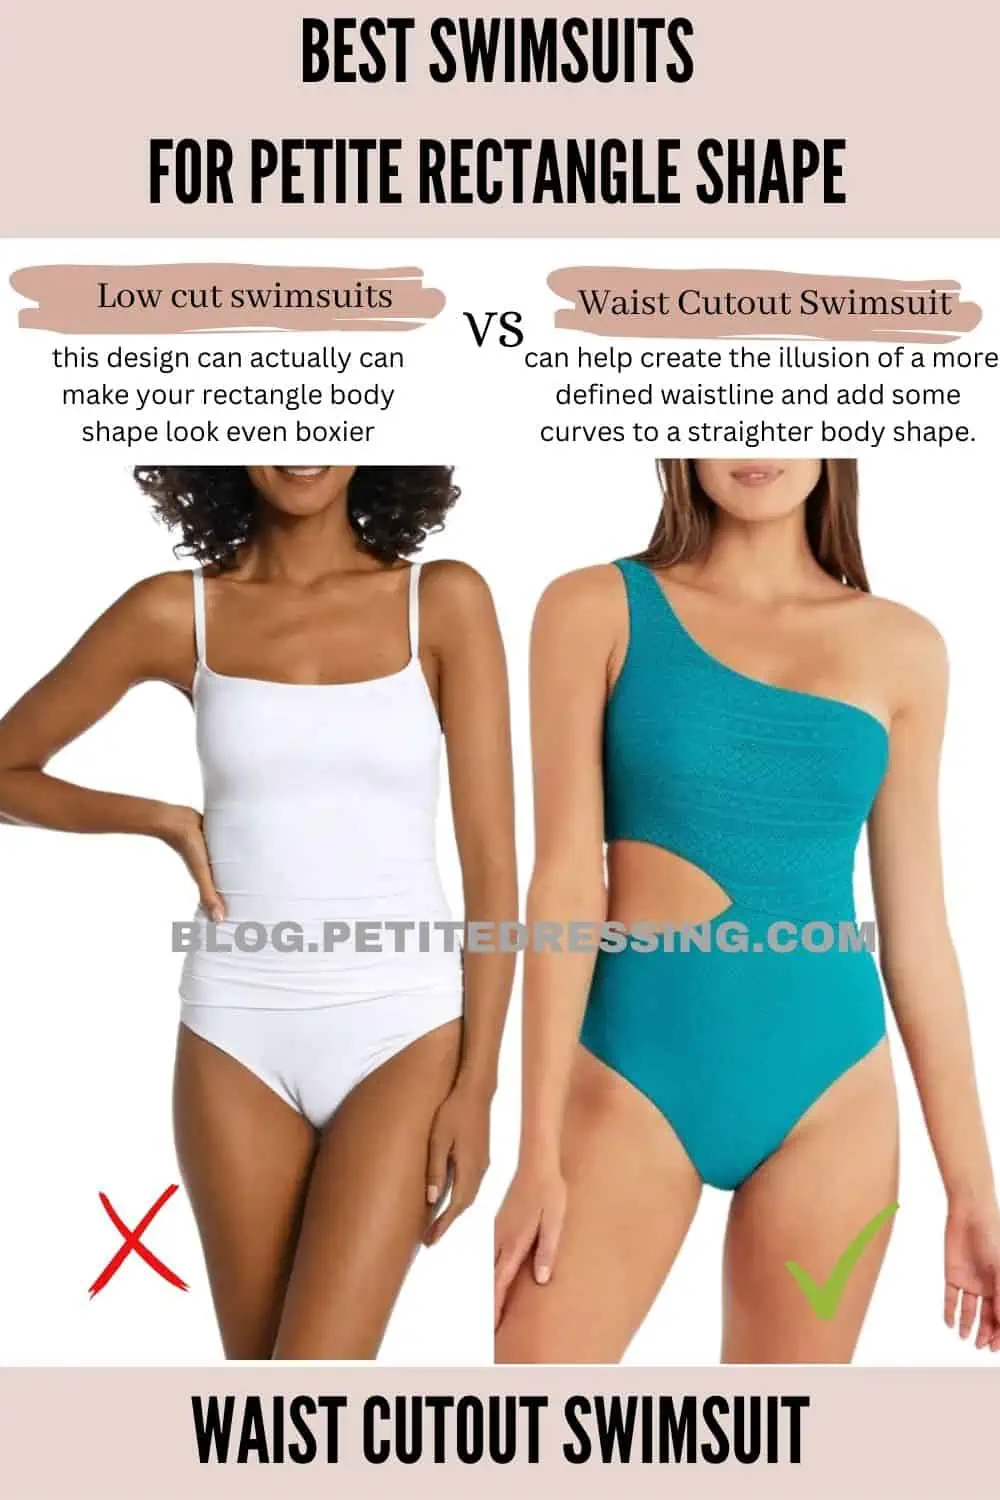 Swimsuit Style Guide for Petite Rectangle Shape - Petite Dressing